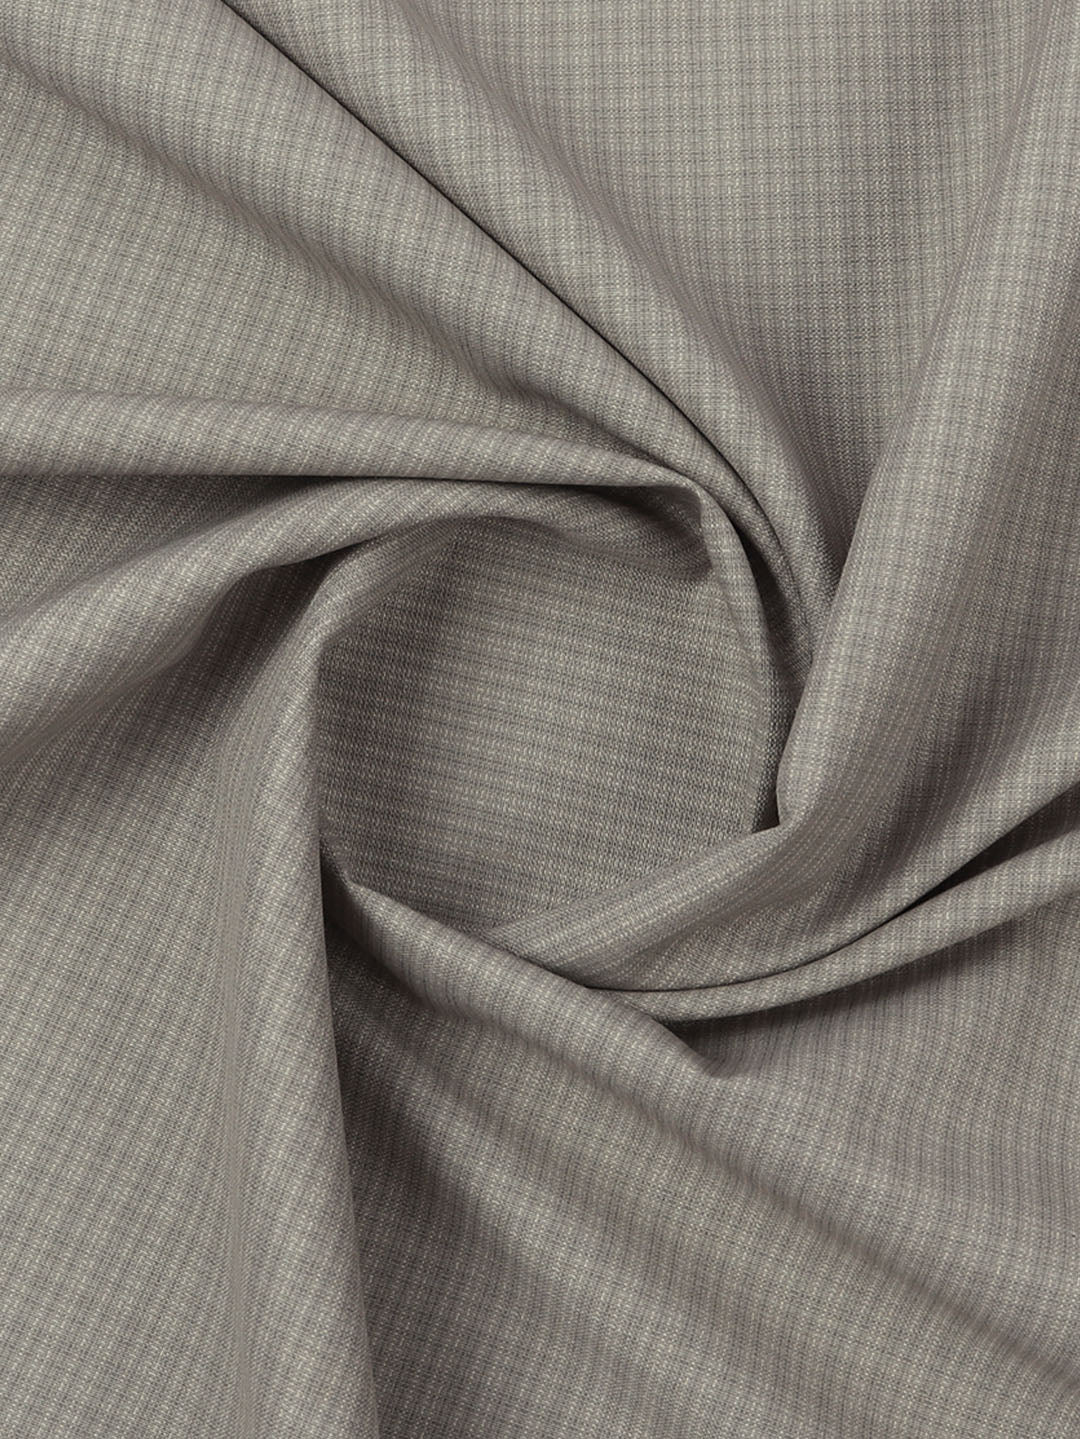 Cotton Checked Super Stretch Grey Suiting Fabric-Chronicle